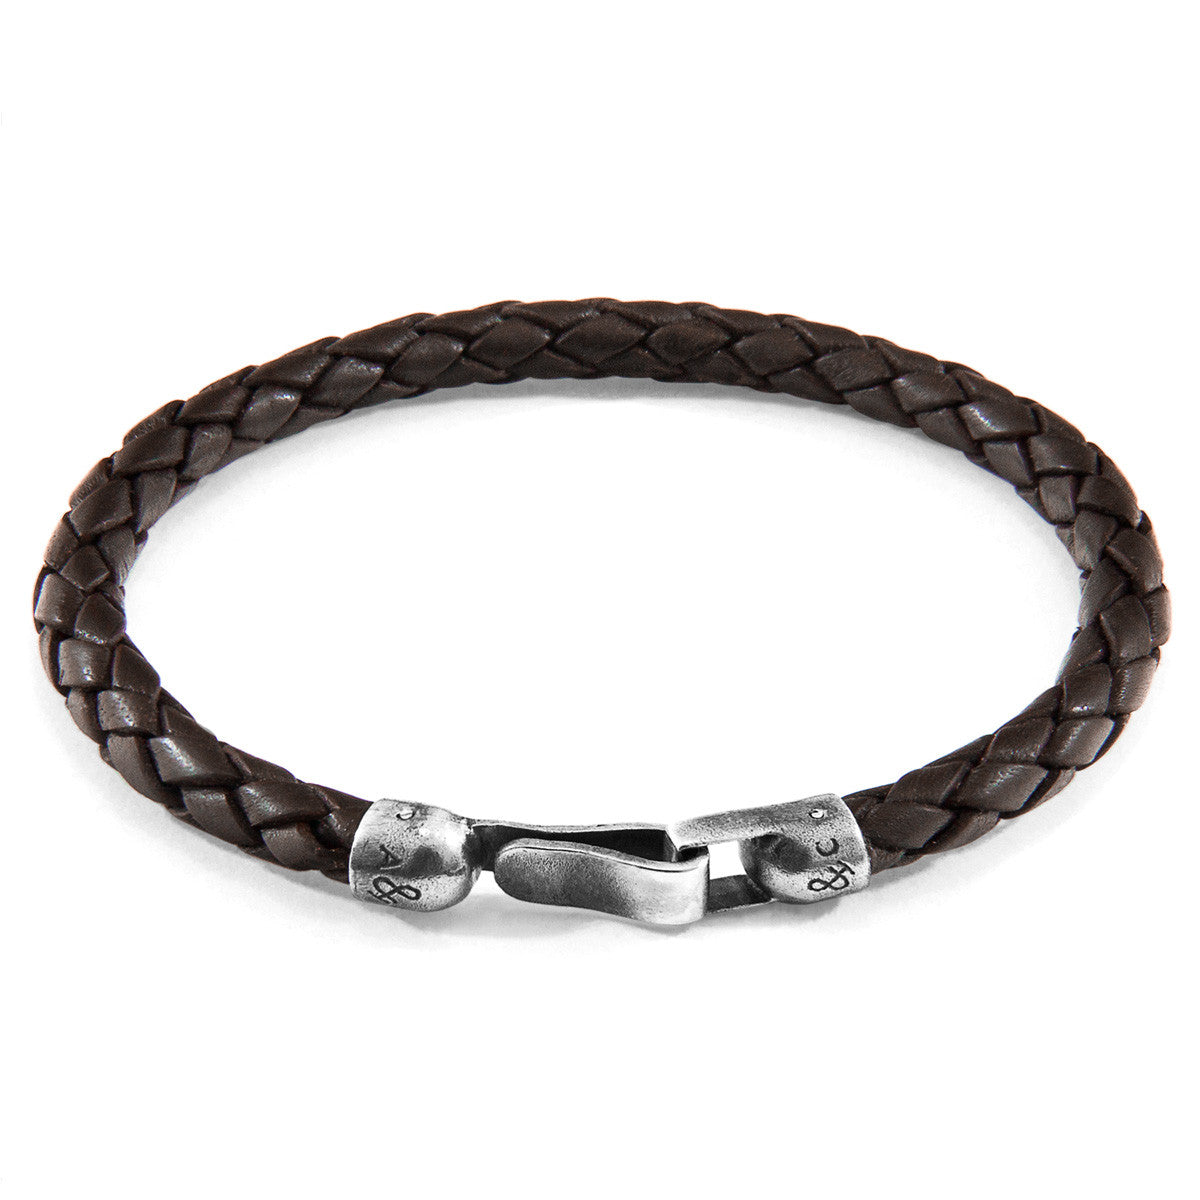 SKYE Leather Braided Bracelet by Anchor and Crew